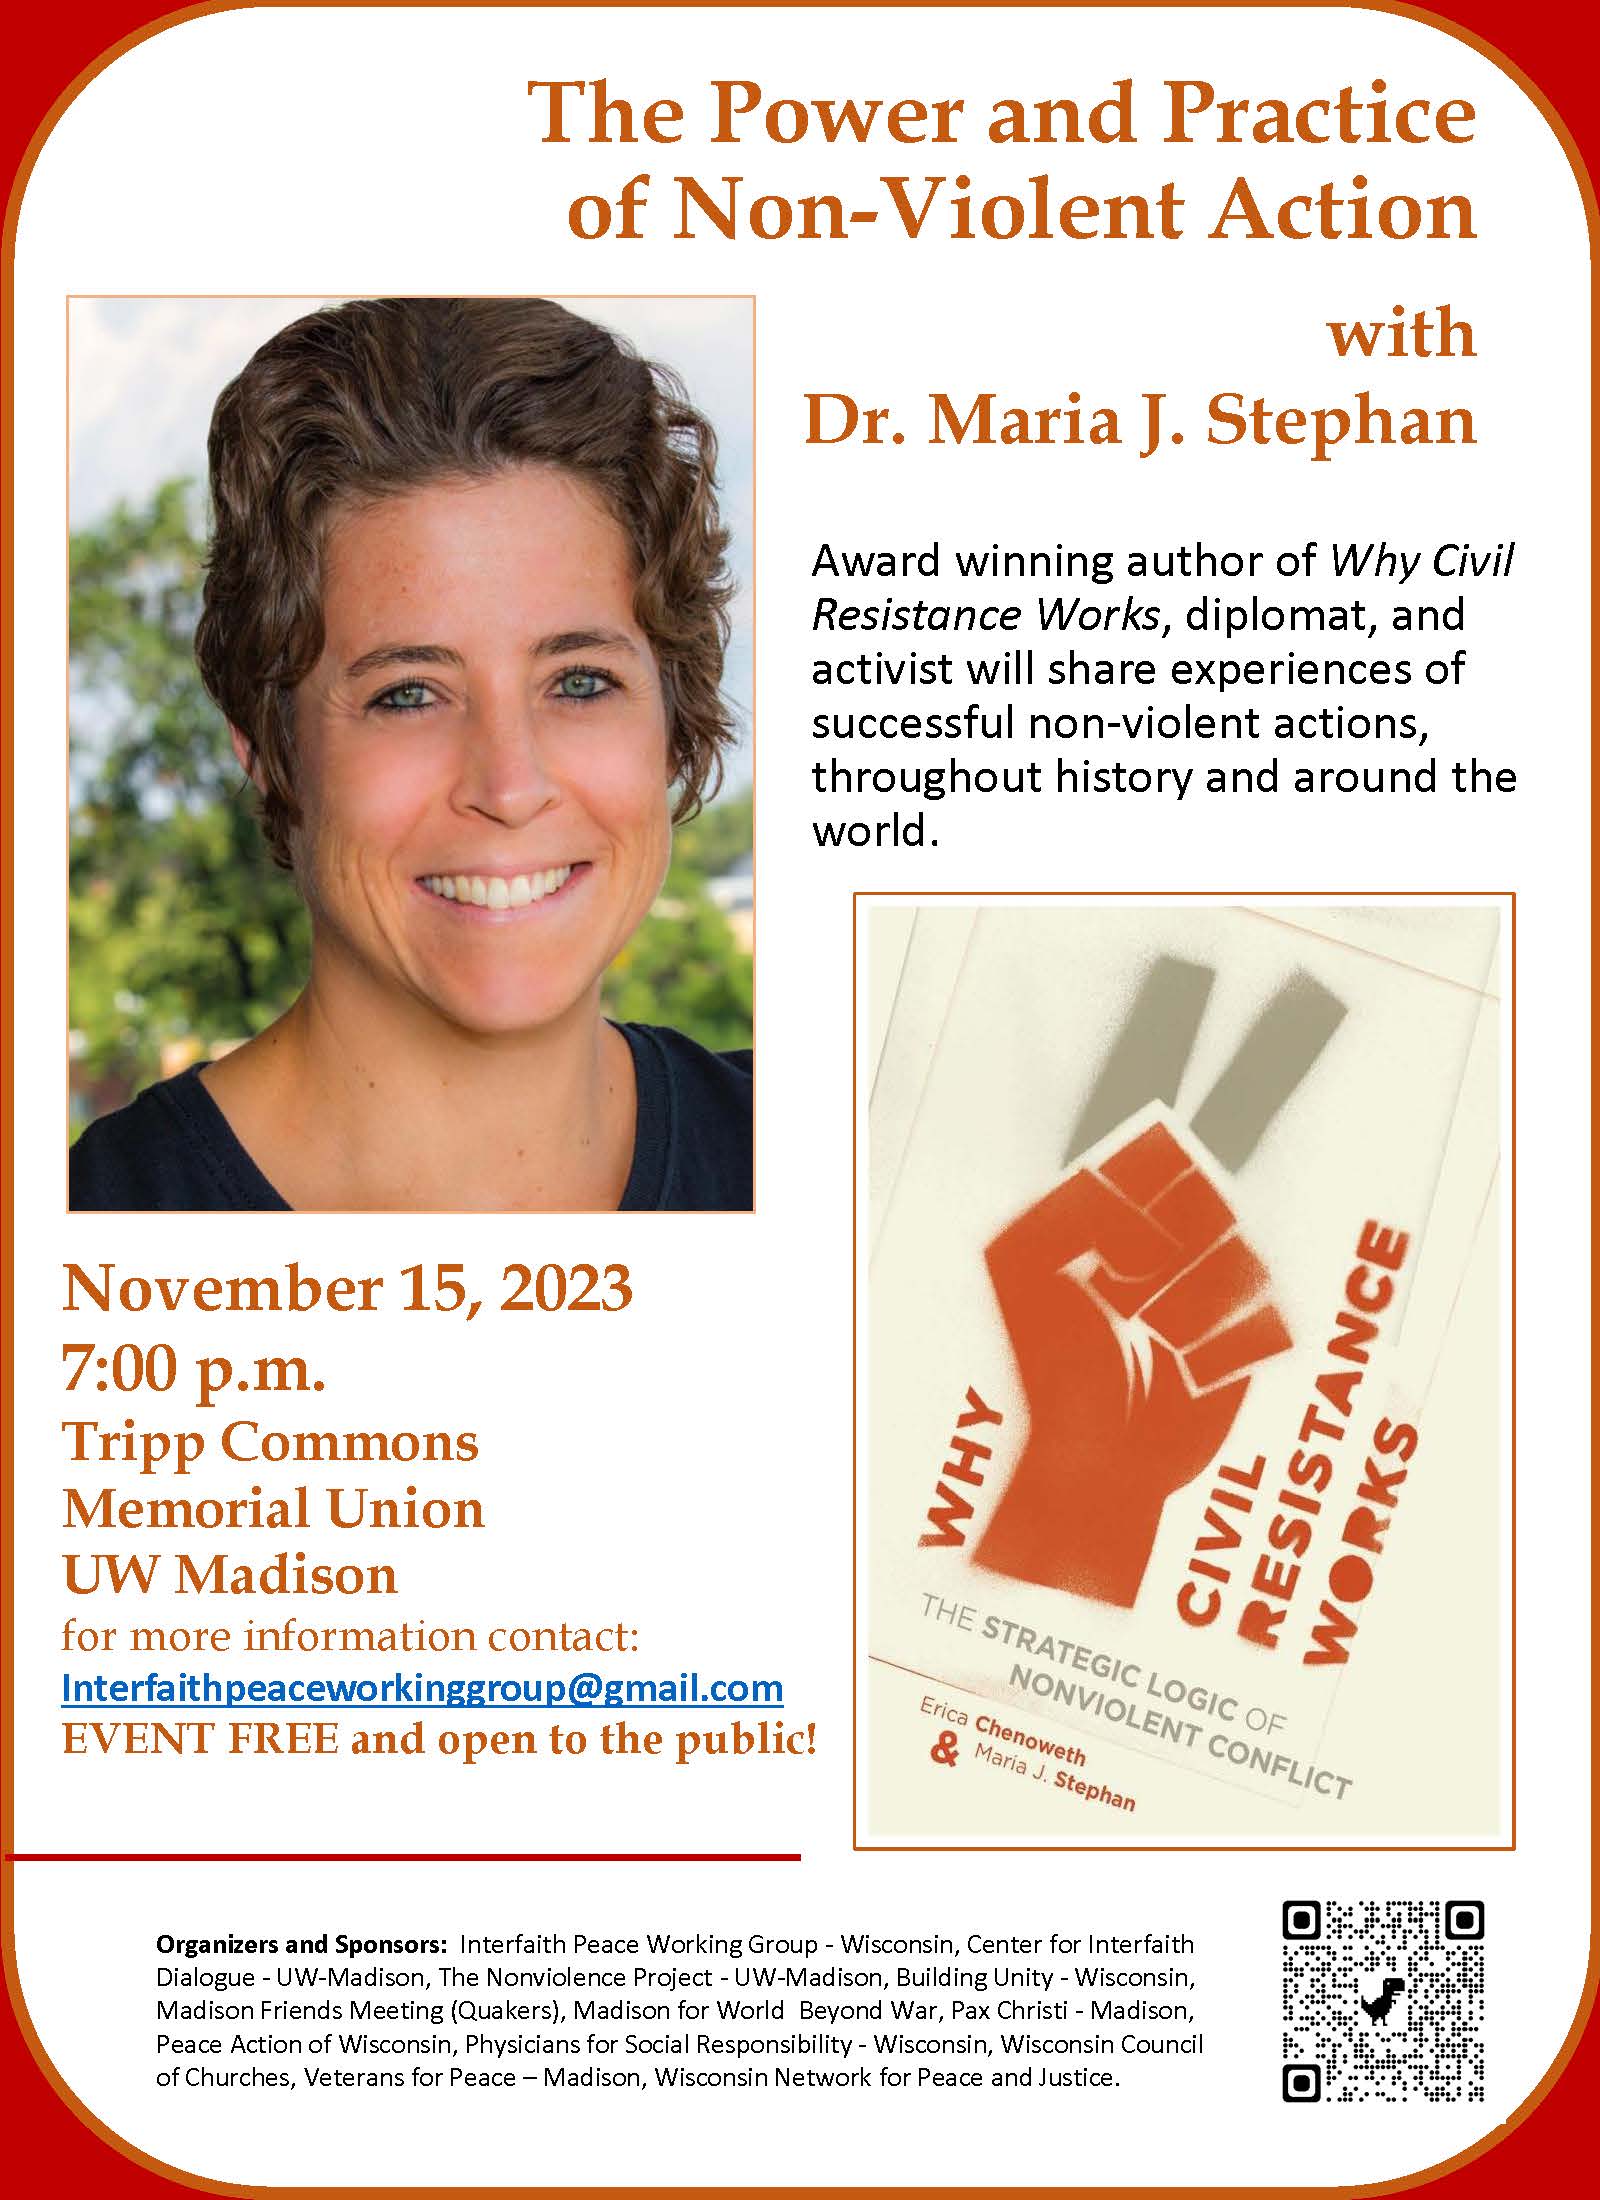 The Power and Practice of Non-Violent Action with Dr. Maria J. Stephan – Nov 15